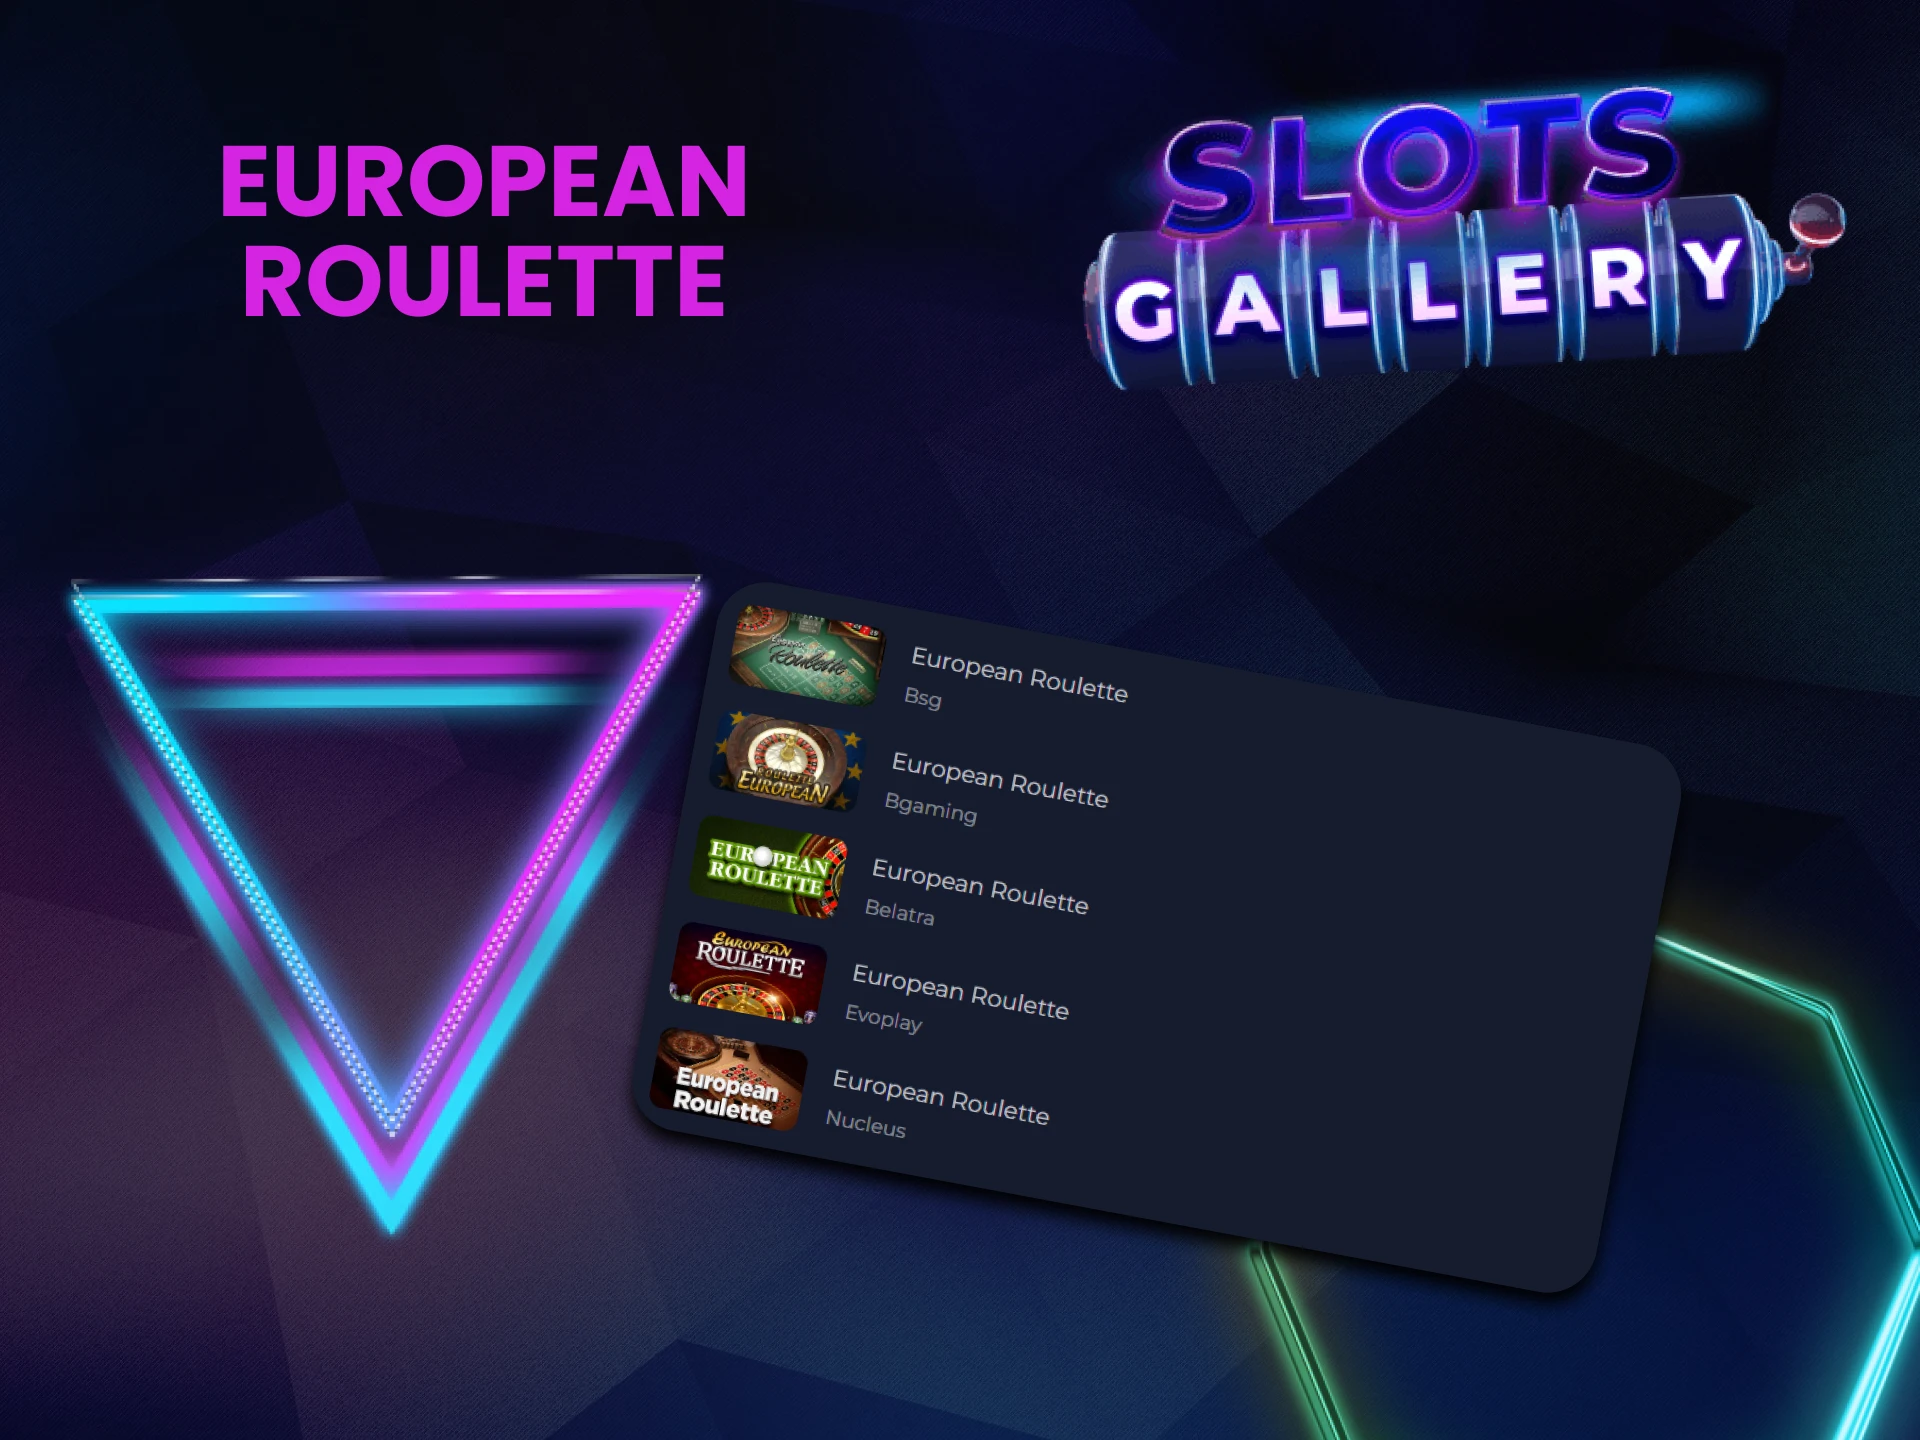 To play roulette at Slots Gallery, choose European Roulette.